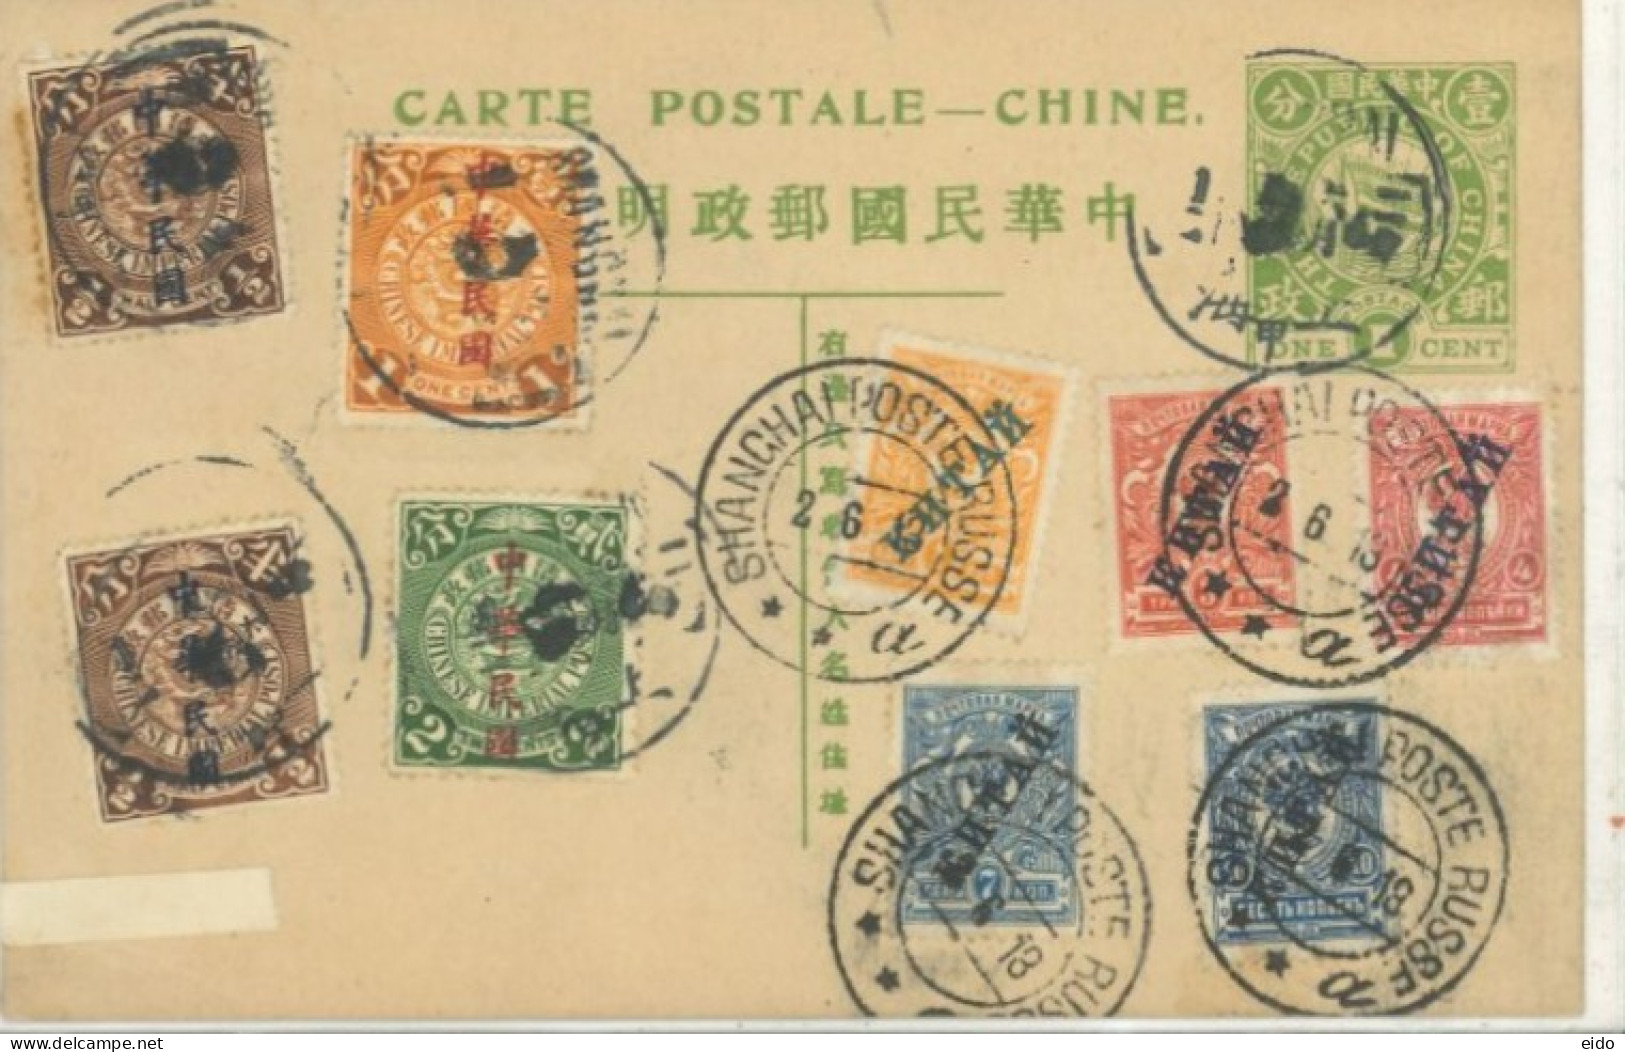 CHINA - 1913, STAMPS POSTCARD WITH SHANGHAI POST FRANKING, RARE. - Covers & Documents